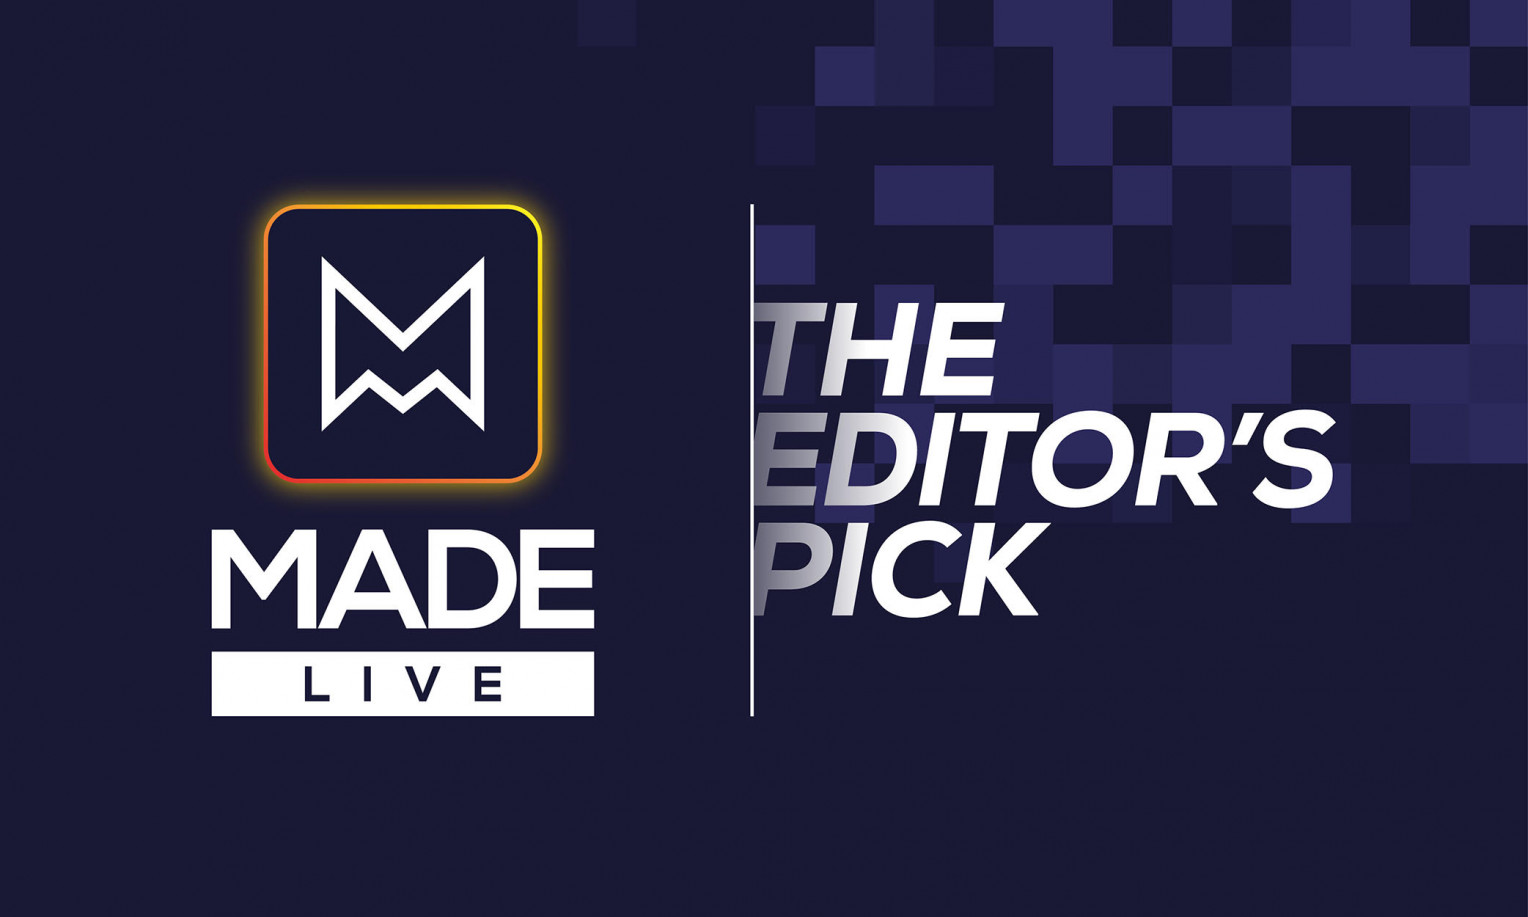 Made LIVE TV: The Editor's Pick